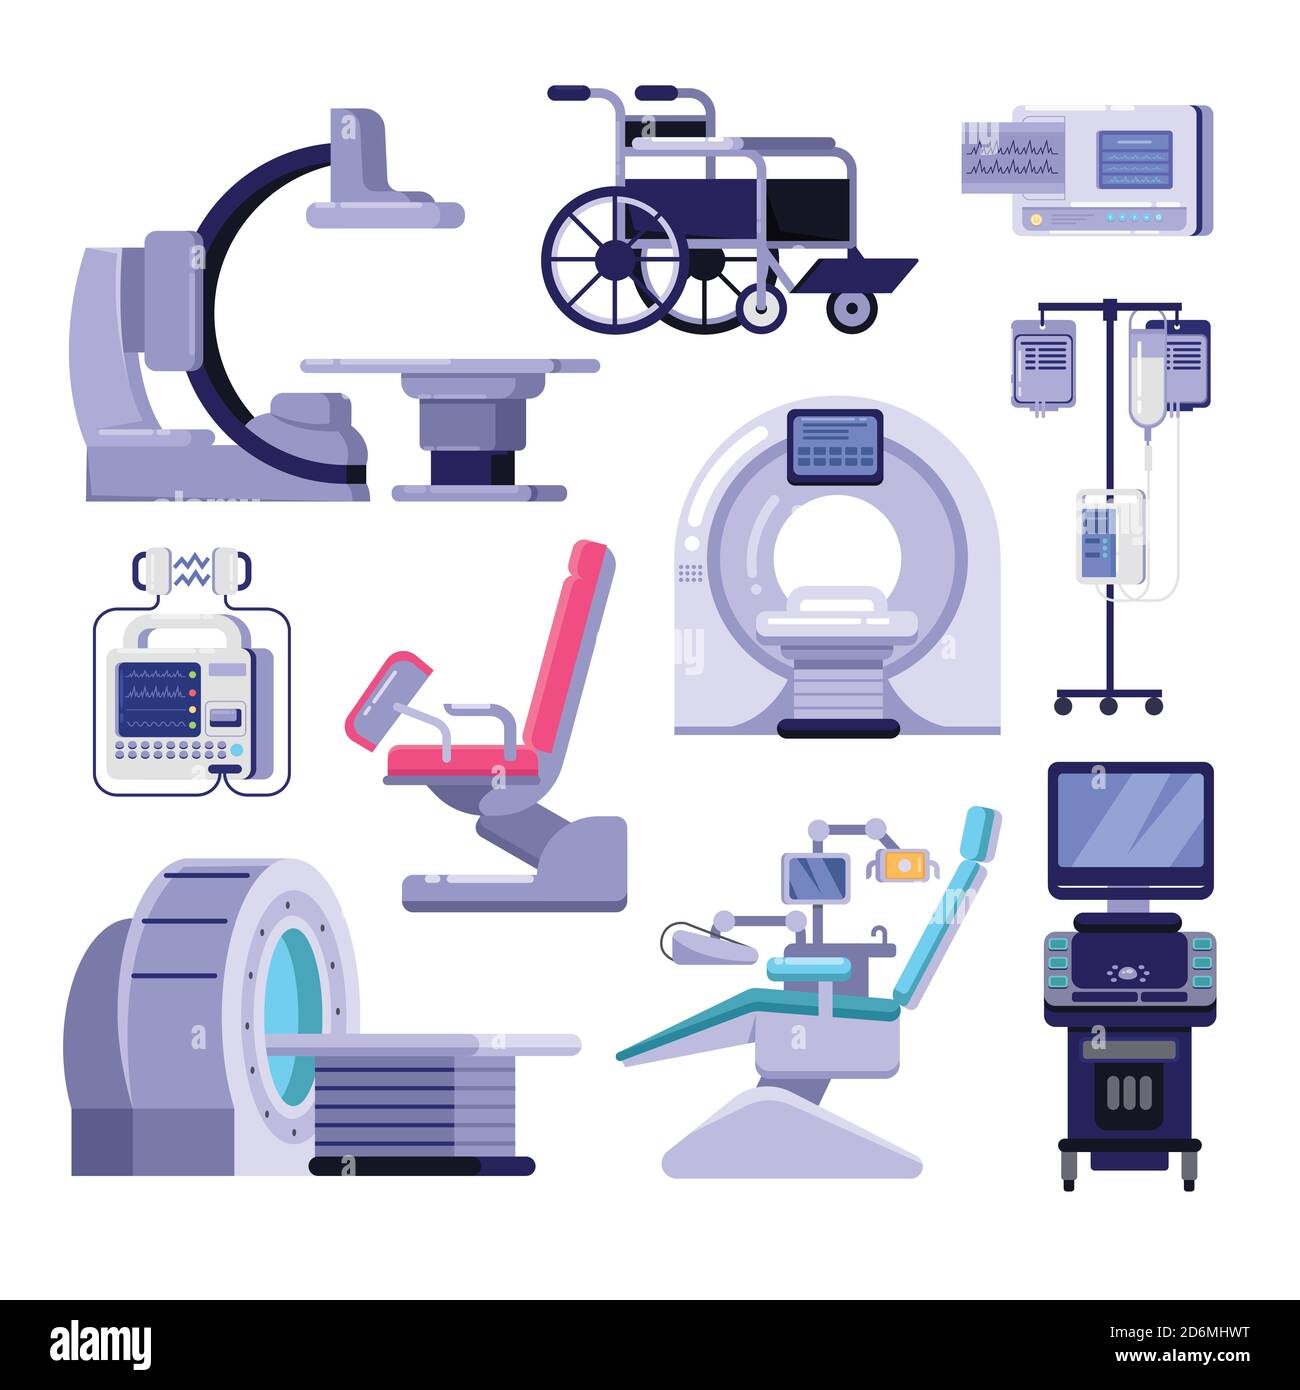 Medical diagnostic and examination equipment. Vector illustration of MRI scanner, gynecology and dentist chair, wheelchair, blood transfusion, cardiog Stock Vector